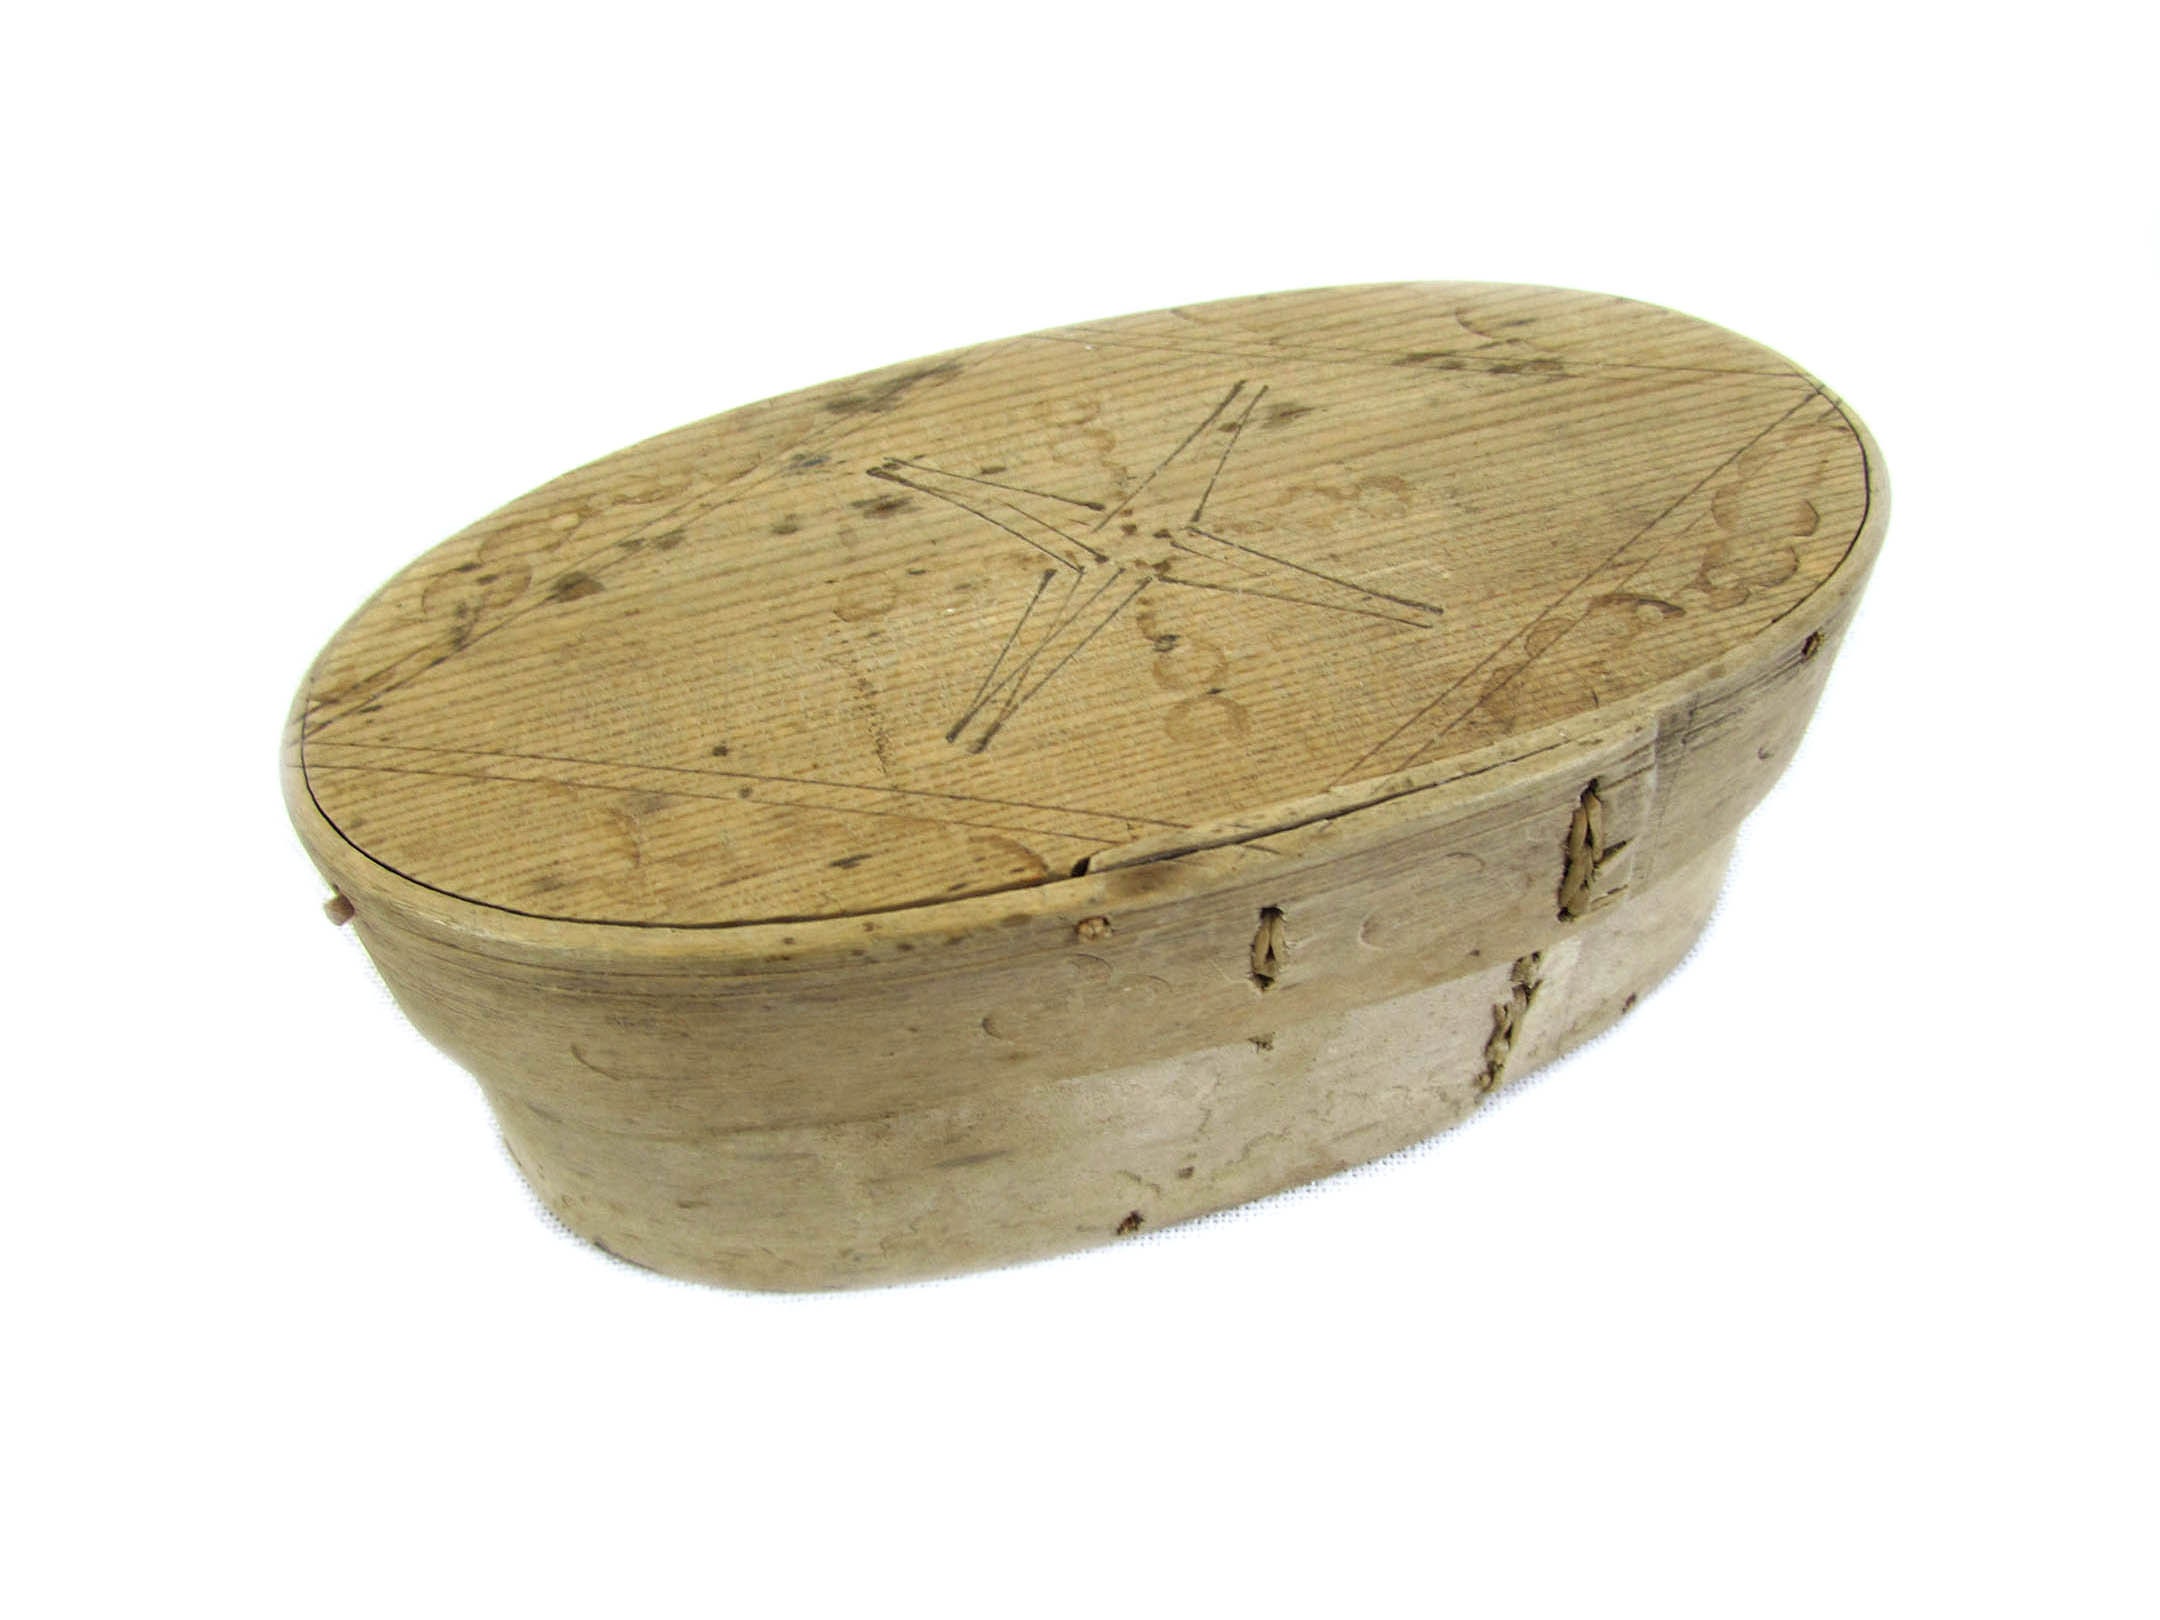 Sold at Auction: Collectibles, 2 SEWING BOXES, END OF 19TH CE